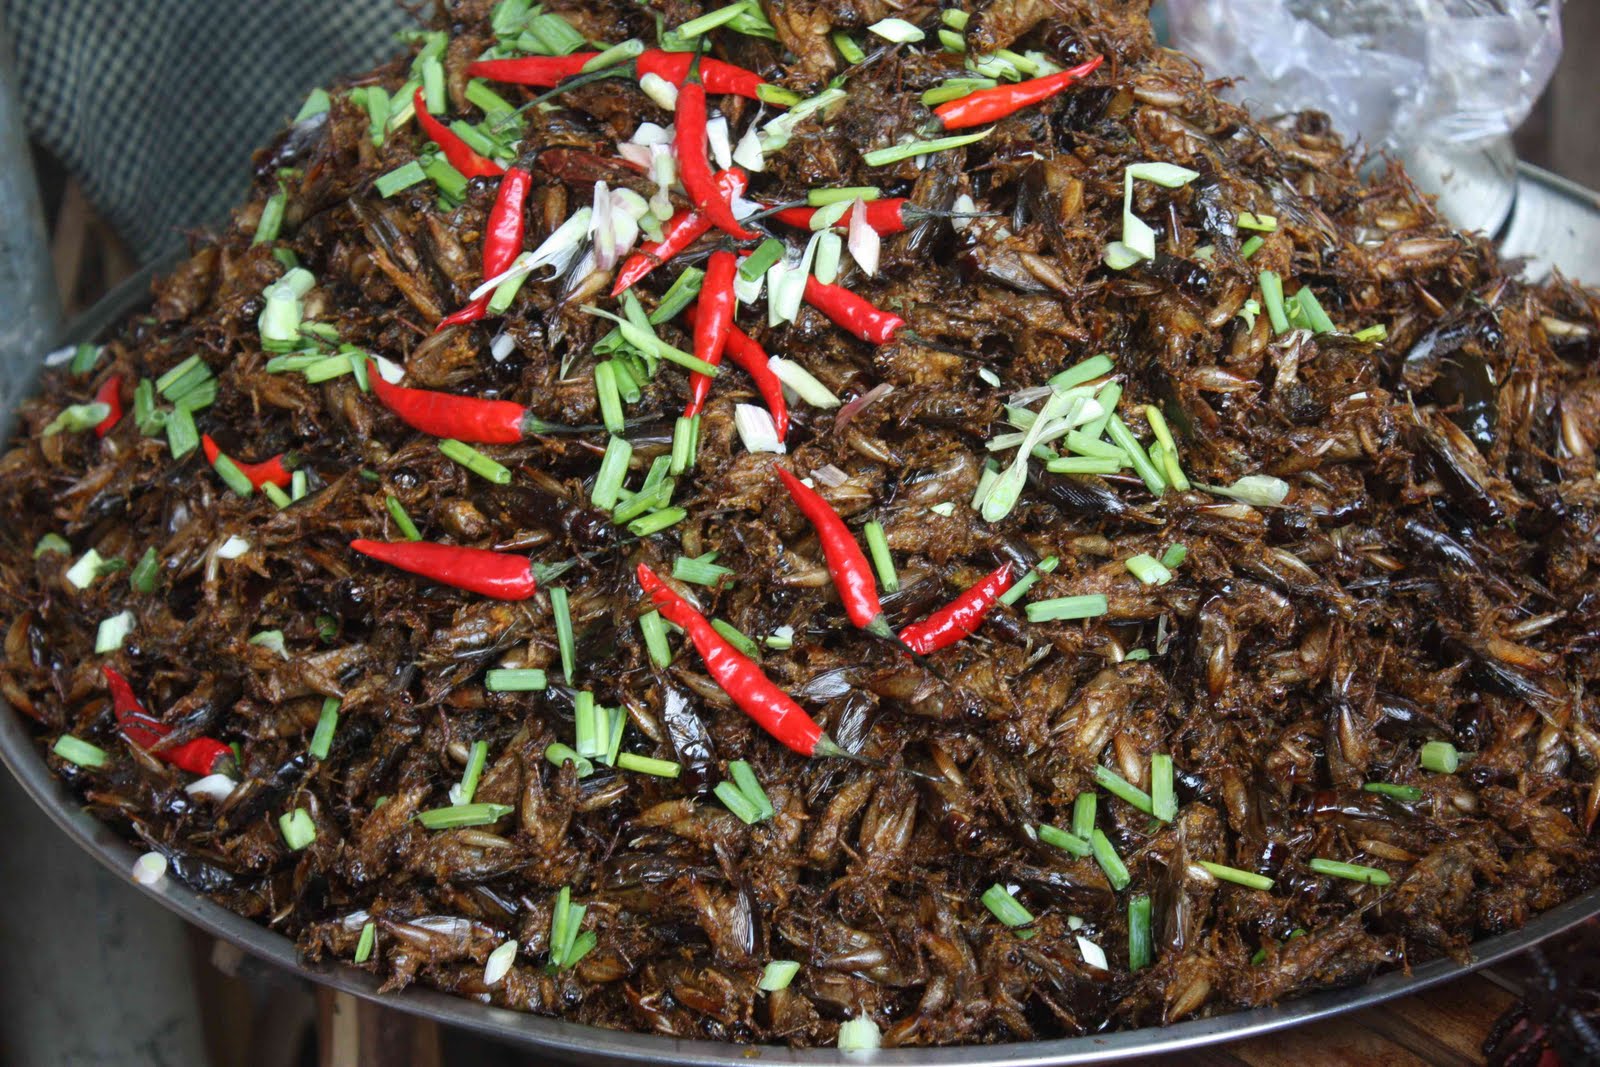 Crickets are fried with chili, a tasty food in Siem Reap’s restaurants